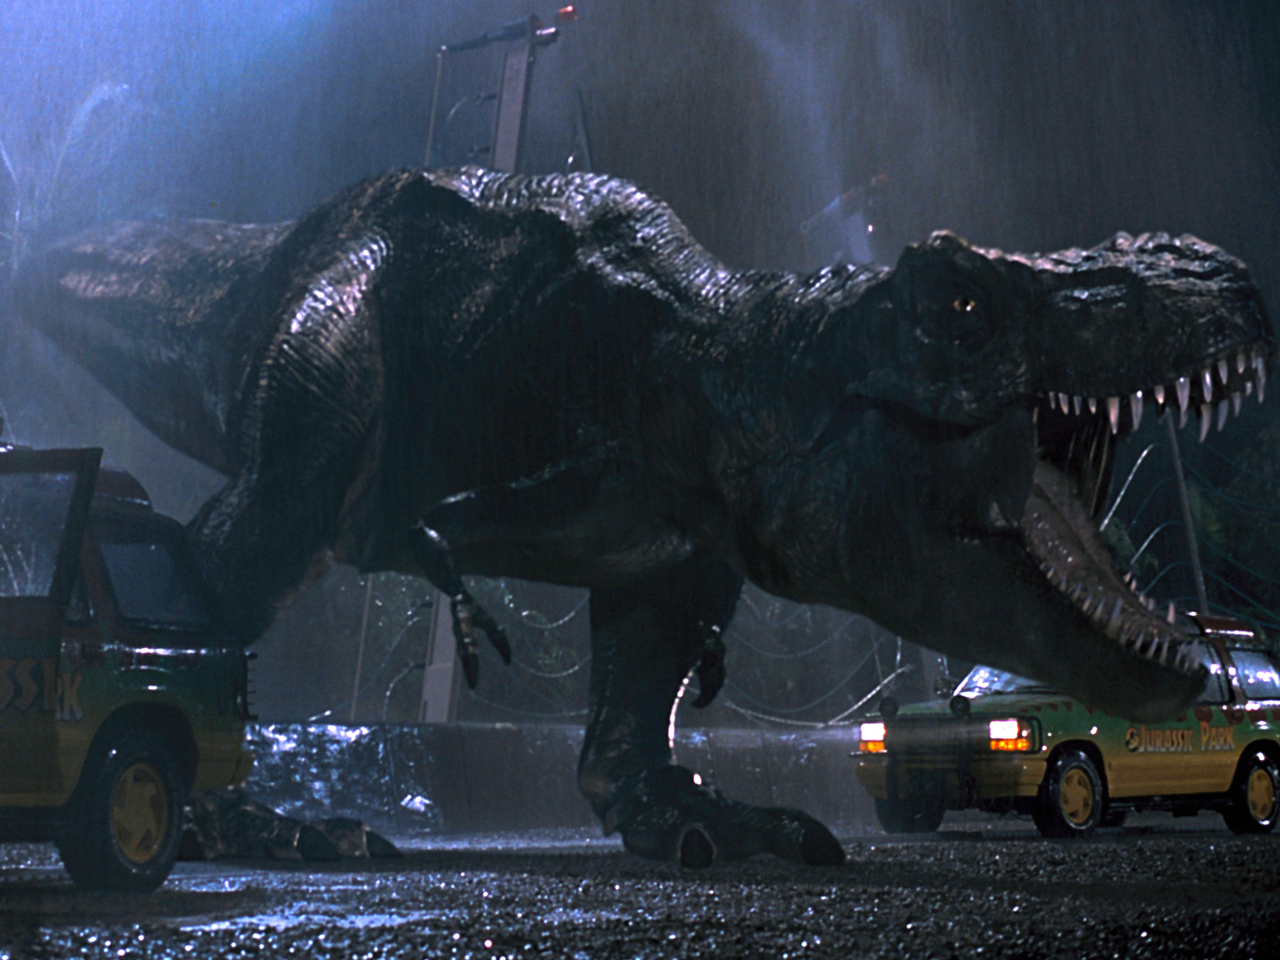 "Jurassic Park" returns to theaters in 3D CBS News